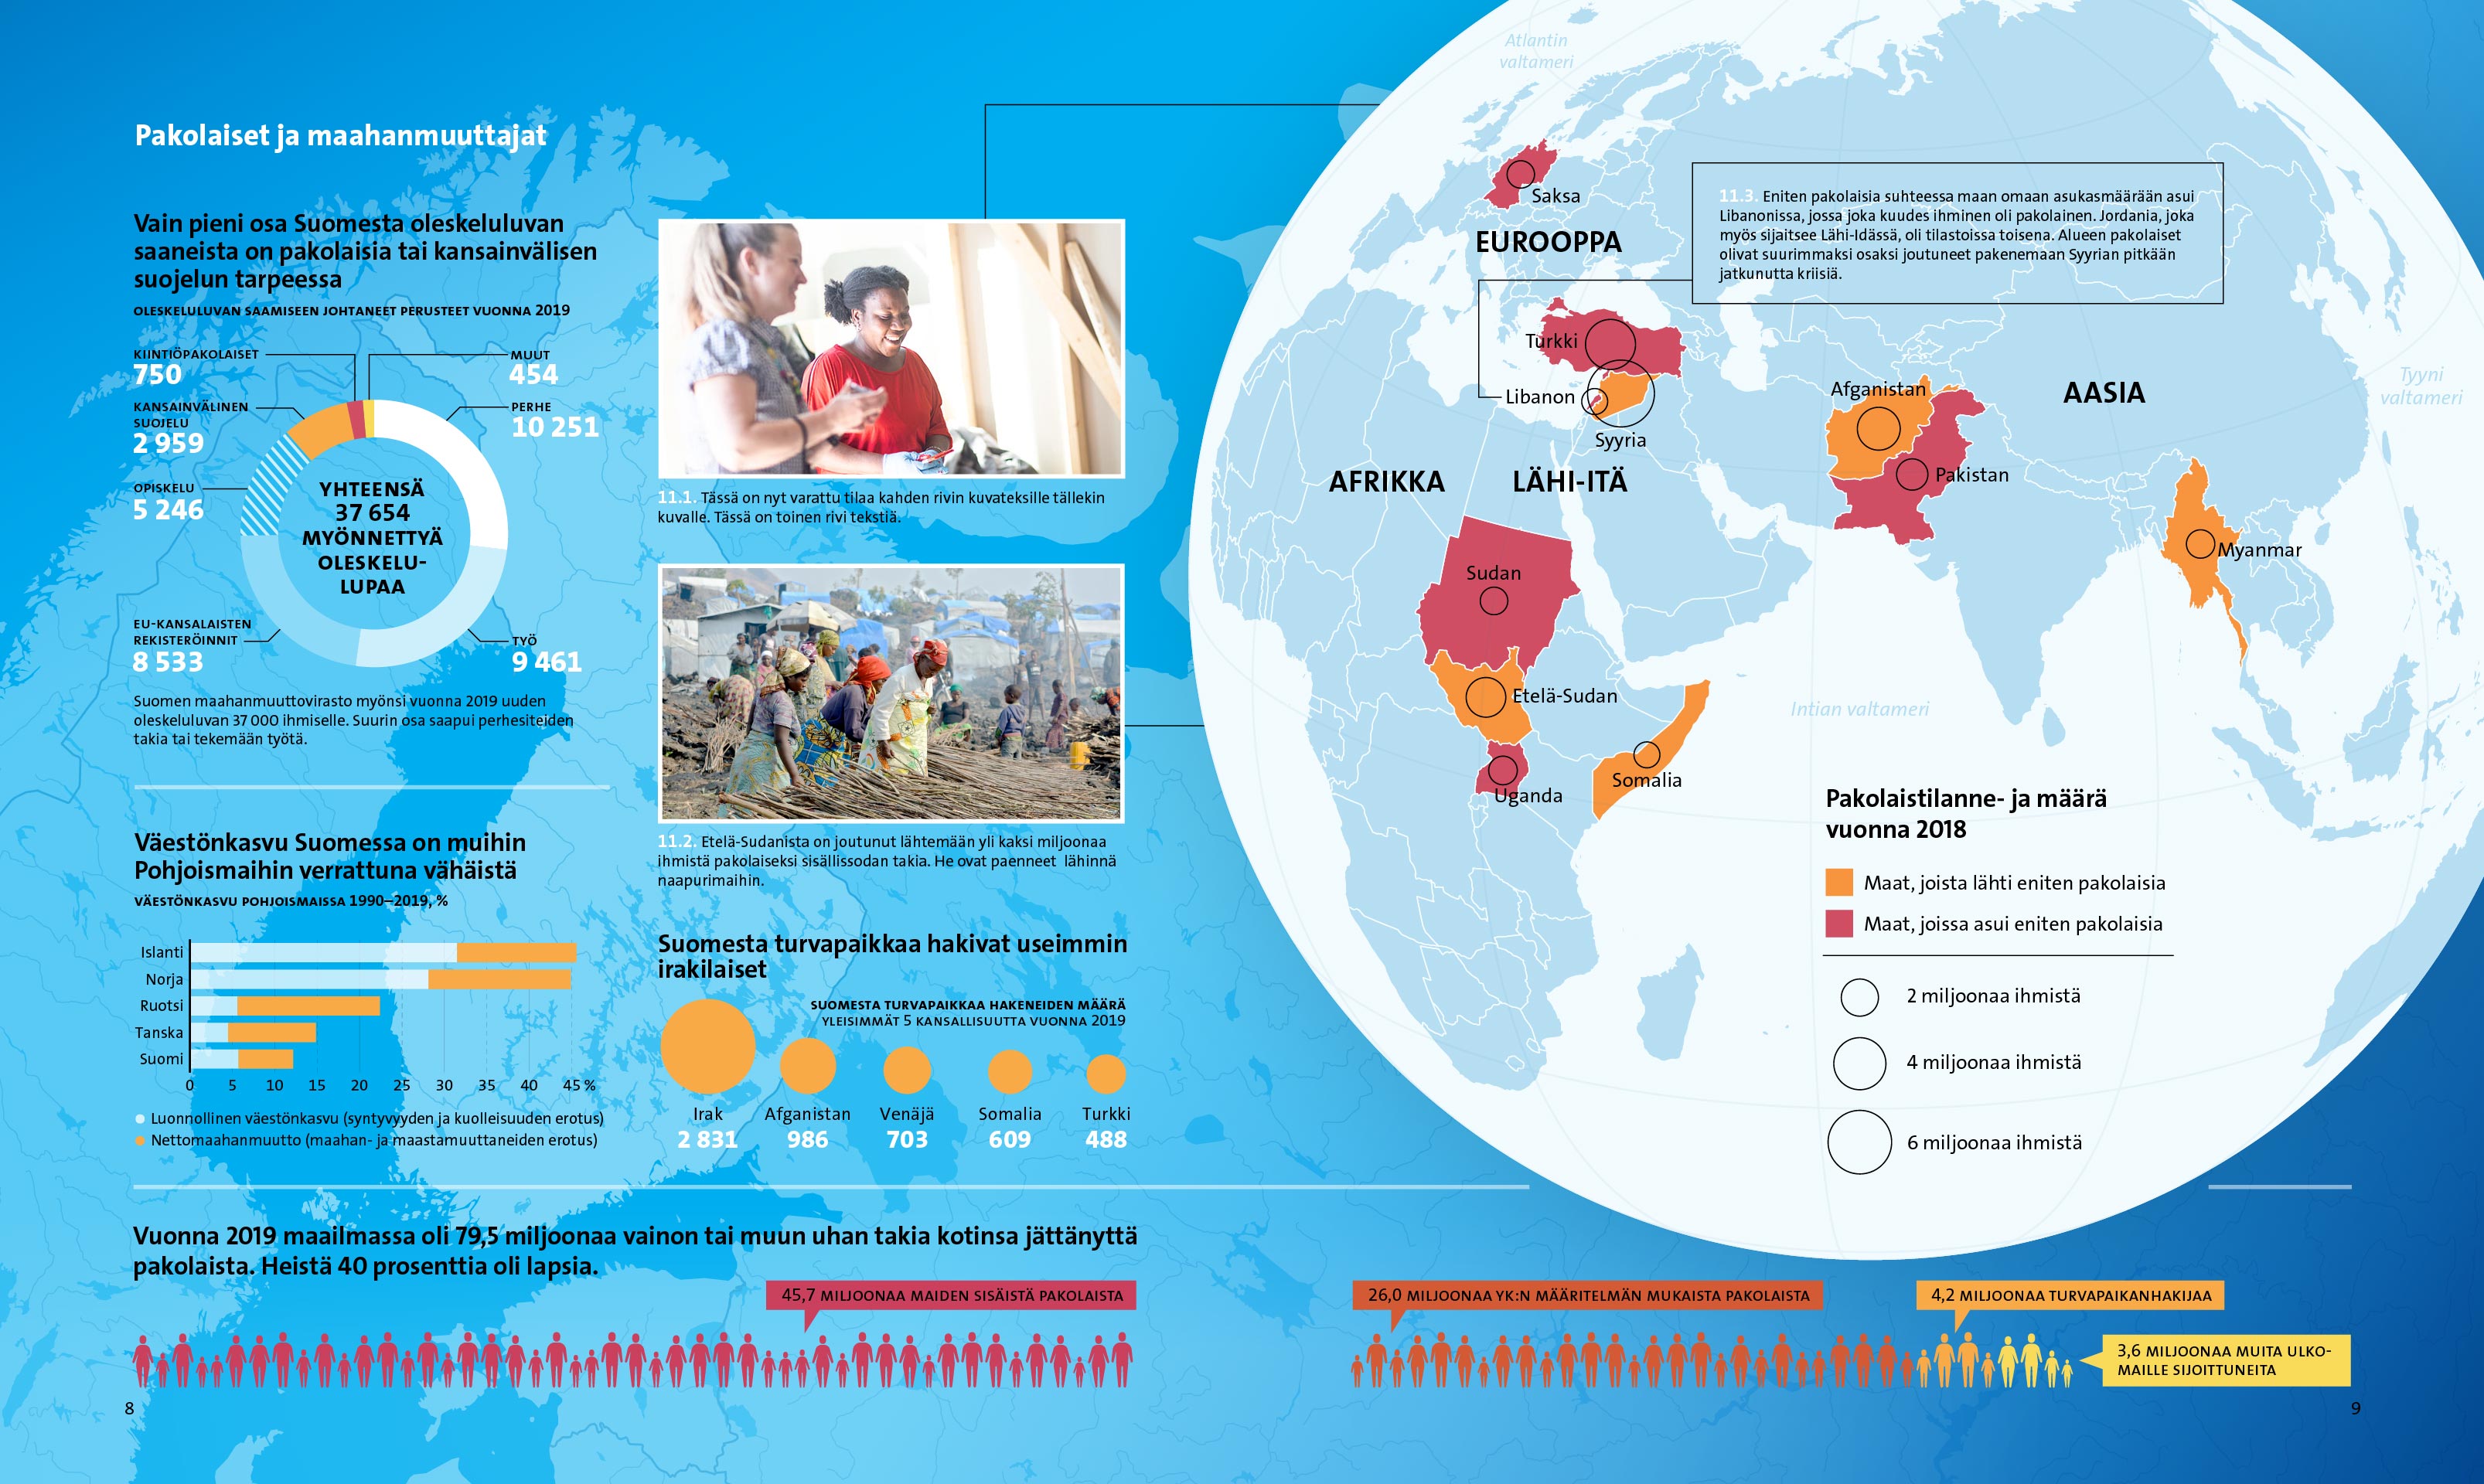 Spread with infographics about refugees and immigration.